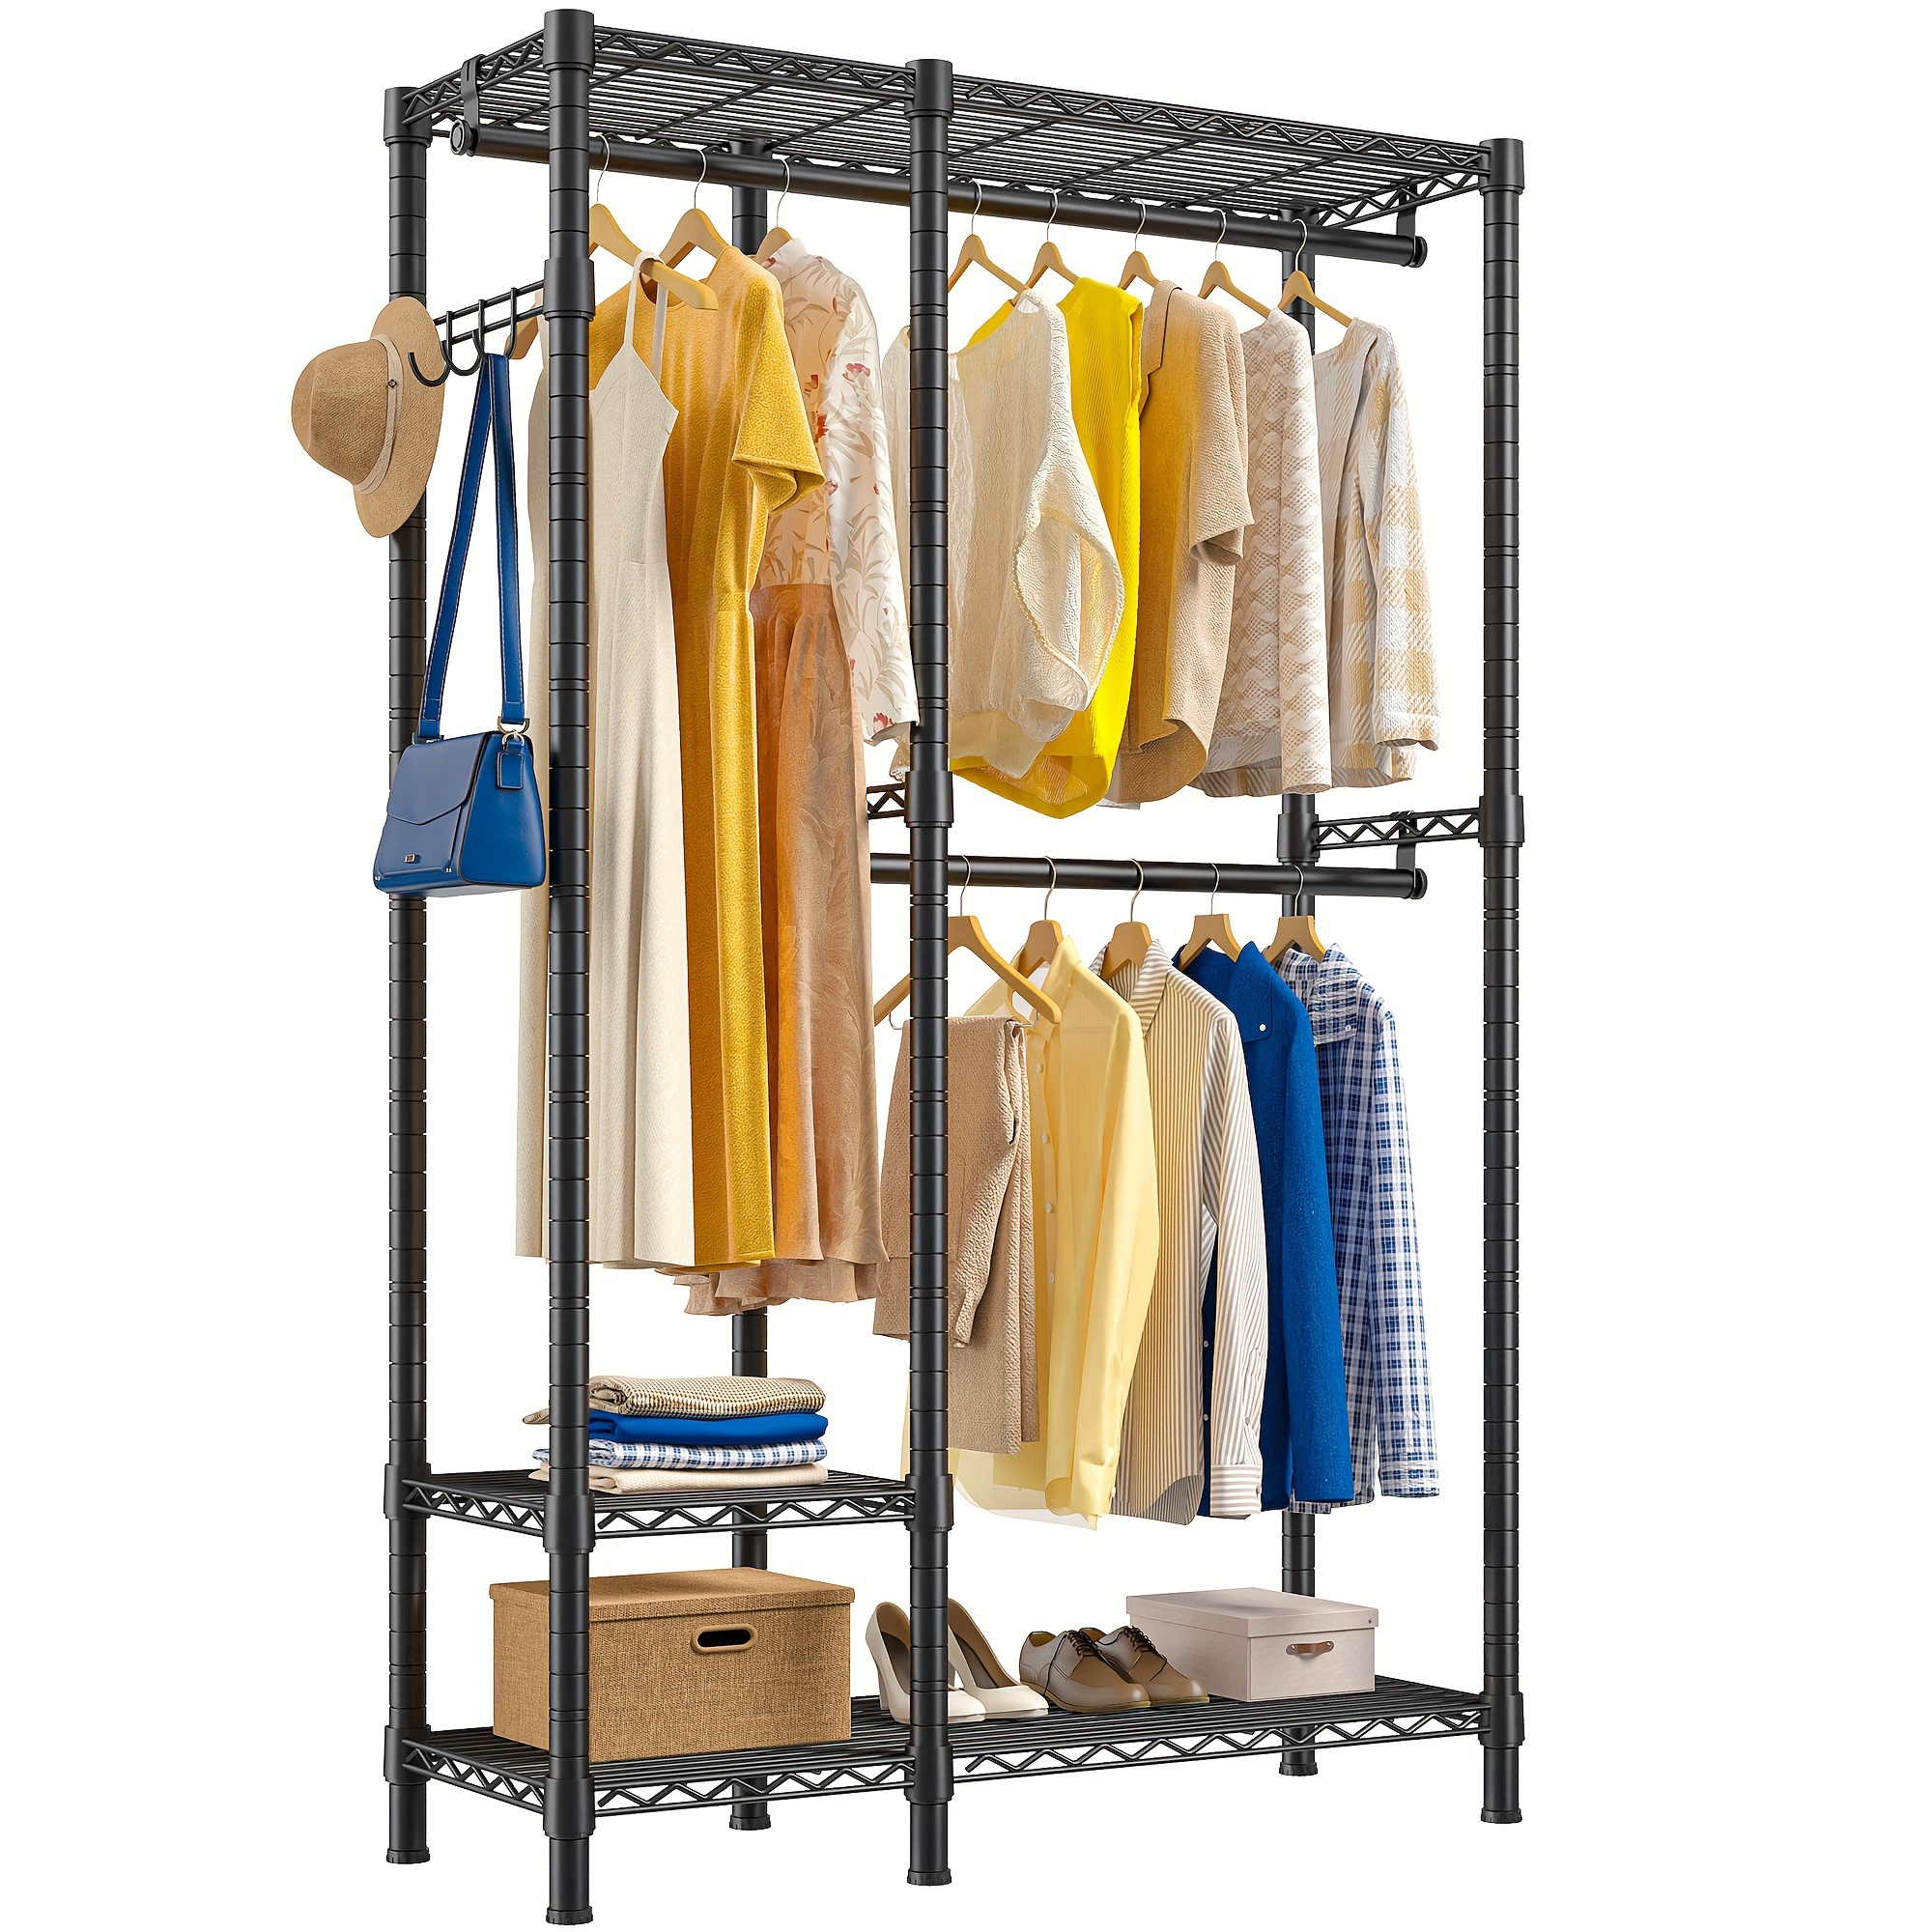 

Clothes Rack Clothing Rack Holds 500lbs Clothing Racks For Hanging Clothes Portable Closet Heavy Duty Clothes Rack Freestanding Wadrobe Closet Wire Garment Rack, 77" Hx31.5 Wx15.8 D, Black